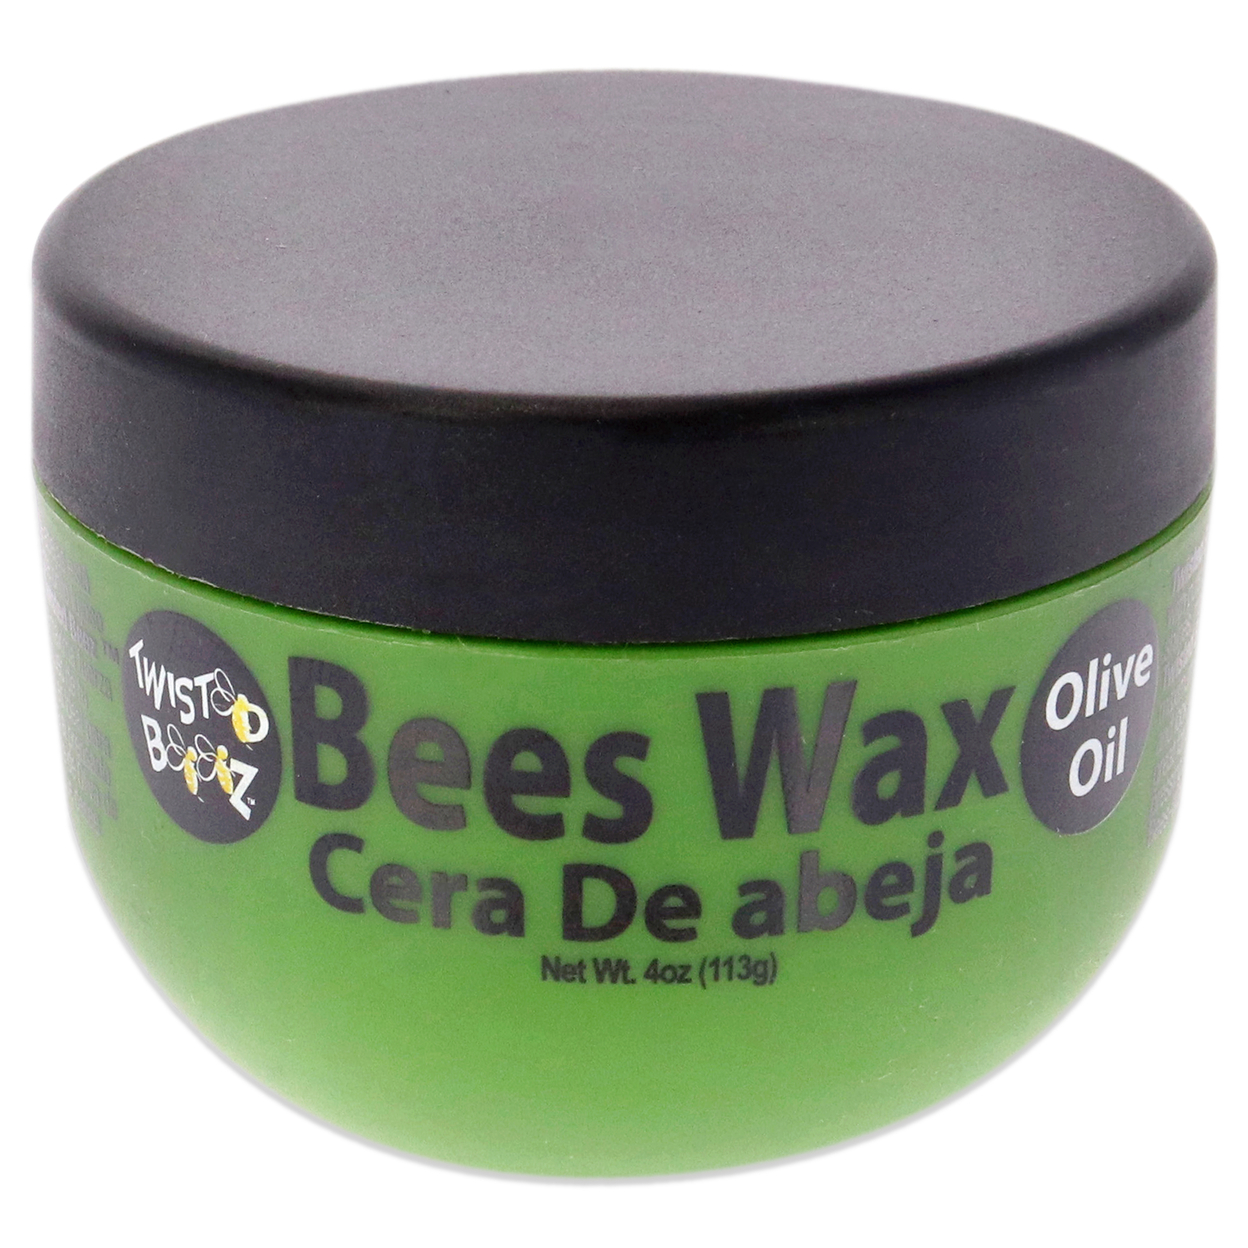 Ecoco Twisted Bees Wax - Olive Oil 4 Oz